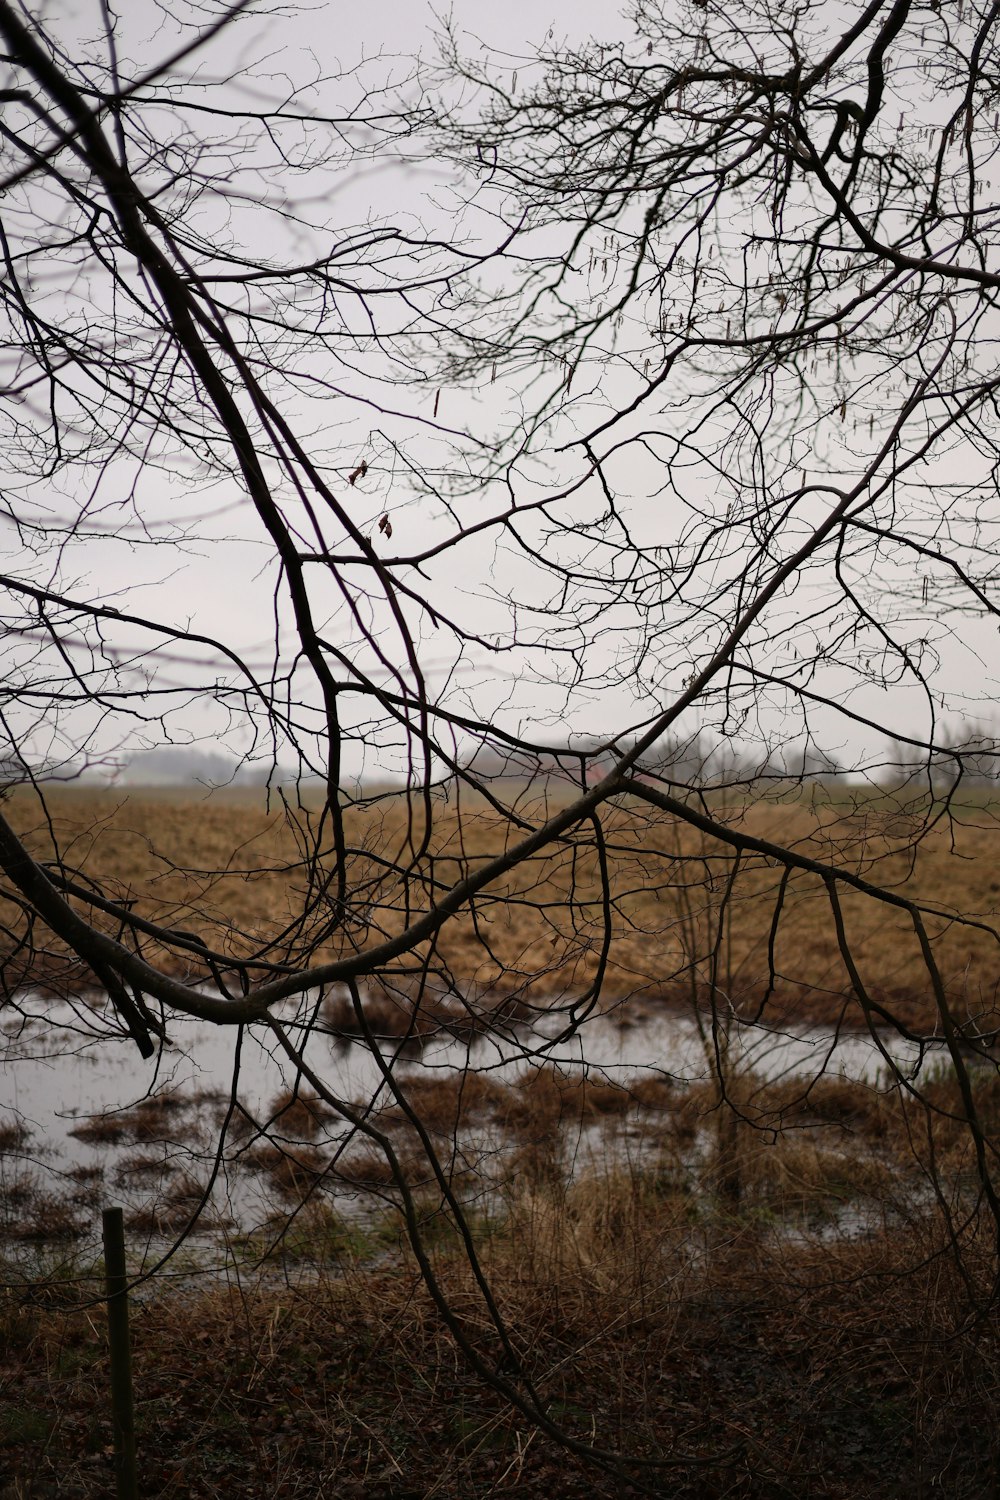 a field with water and trees with no leaves